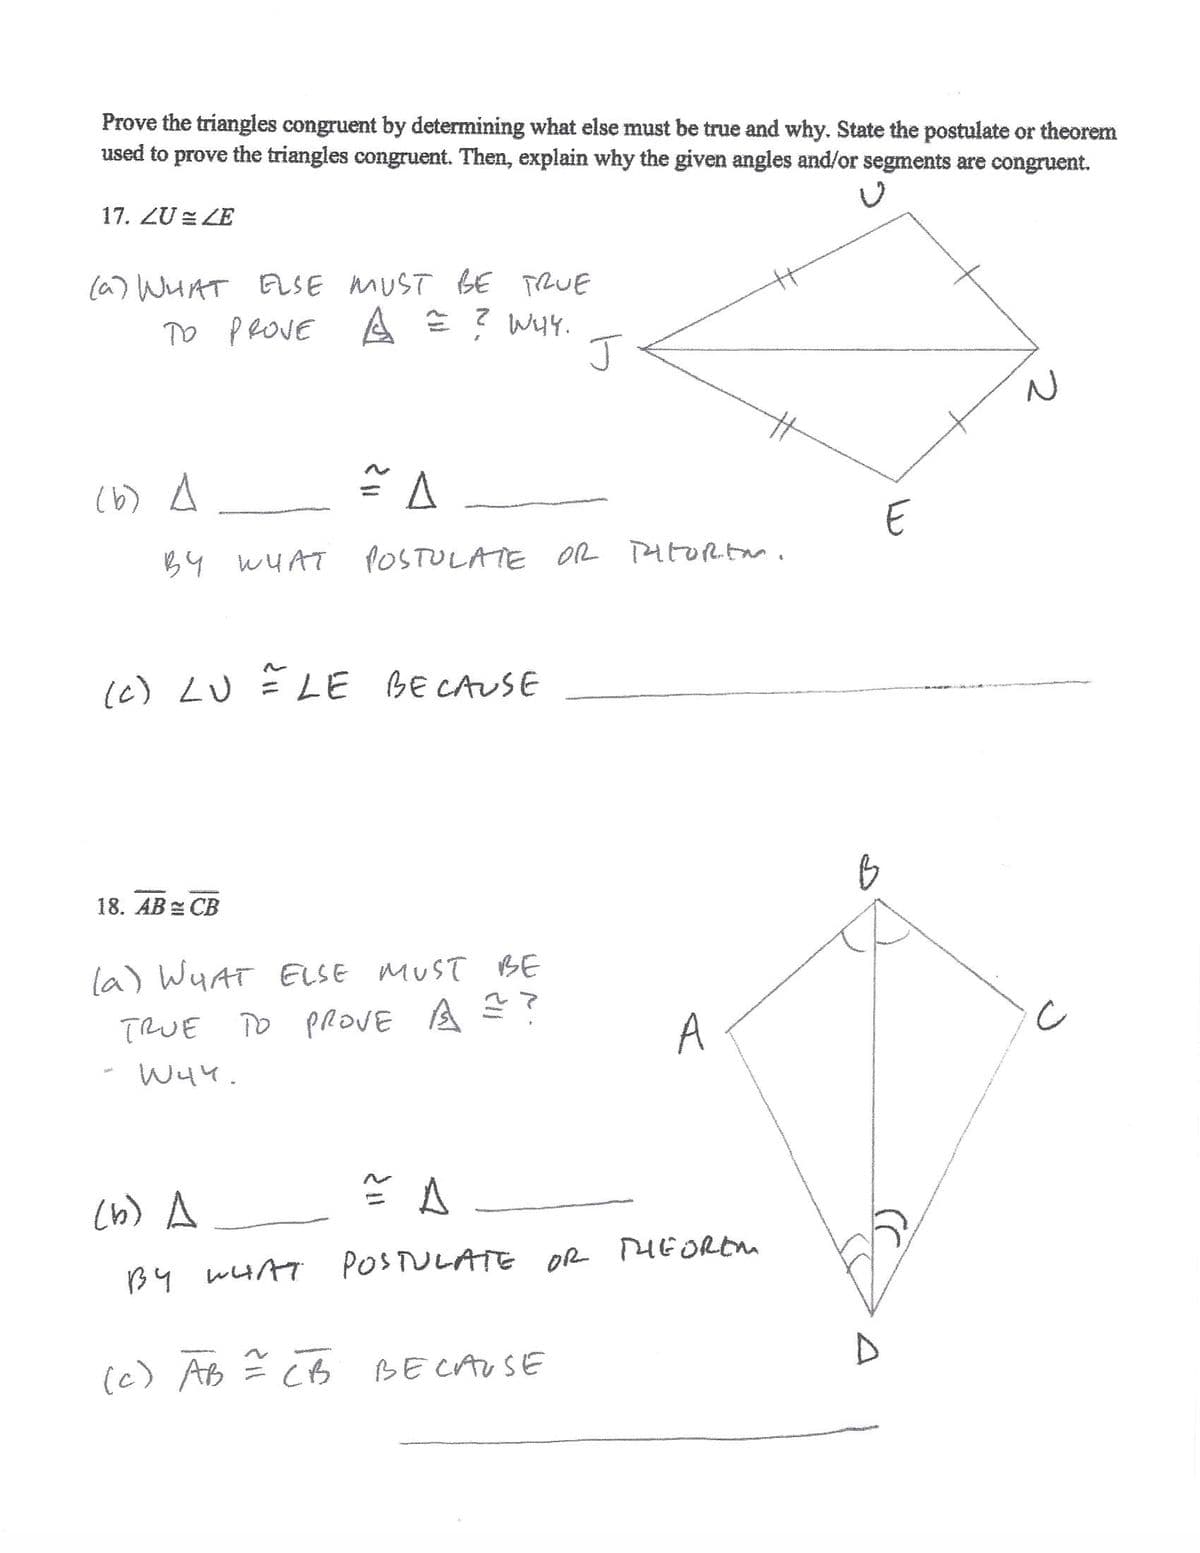 Prove the triangles congruent by determining what else must be true and why. State the postulate or theorem
used to prove the triangles congruent. Then, explain why the given angles and/or segments are congruent.
17. ZU = ZE
(a) WHAT TRUE
E ? W4.
J
ELSE MUST BE
TO PROVE
A
(6b) A
B4 WUAT
POSTULATE OR PAtORtm.
(c) LU LE BE CAUSE
18. AB = CB
la) WHAT ELSE MUST BE
TRUE TO
o PROVE A
A
- W44.
cb) A
PIEOREM
B4 WHAT POSTULATE OR
(c) AB
BE CAUSE
